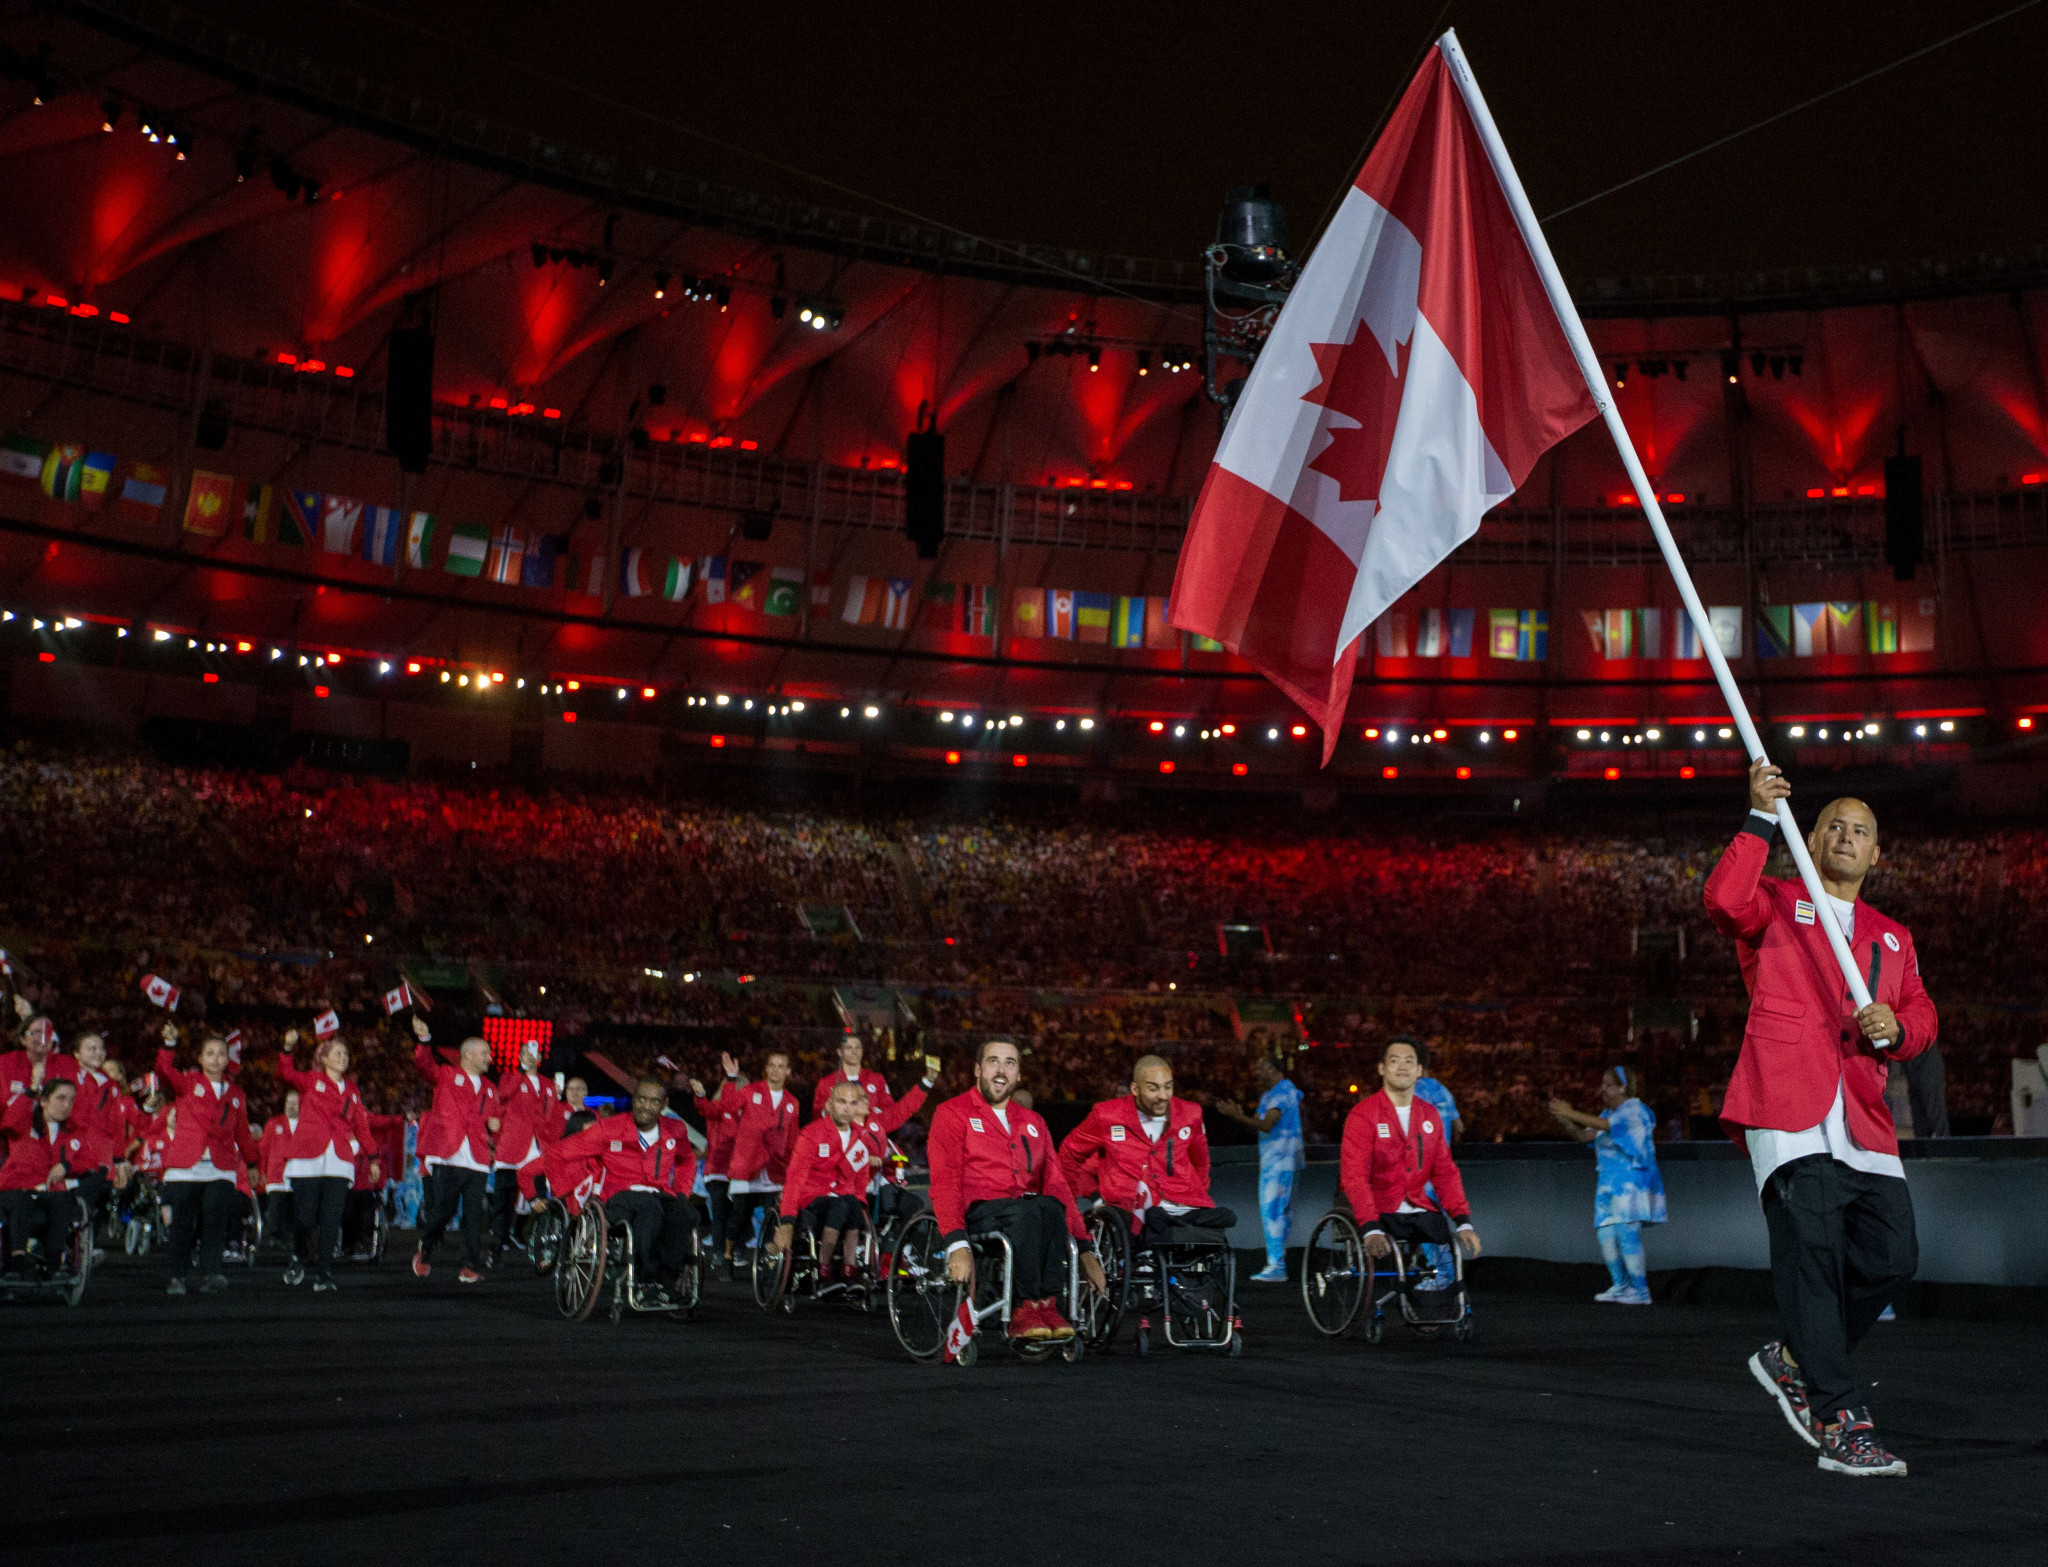 David Eng was the Canadian flagbearer at the Rio 2016 Paralympics ©Getty Images